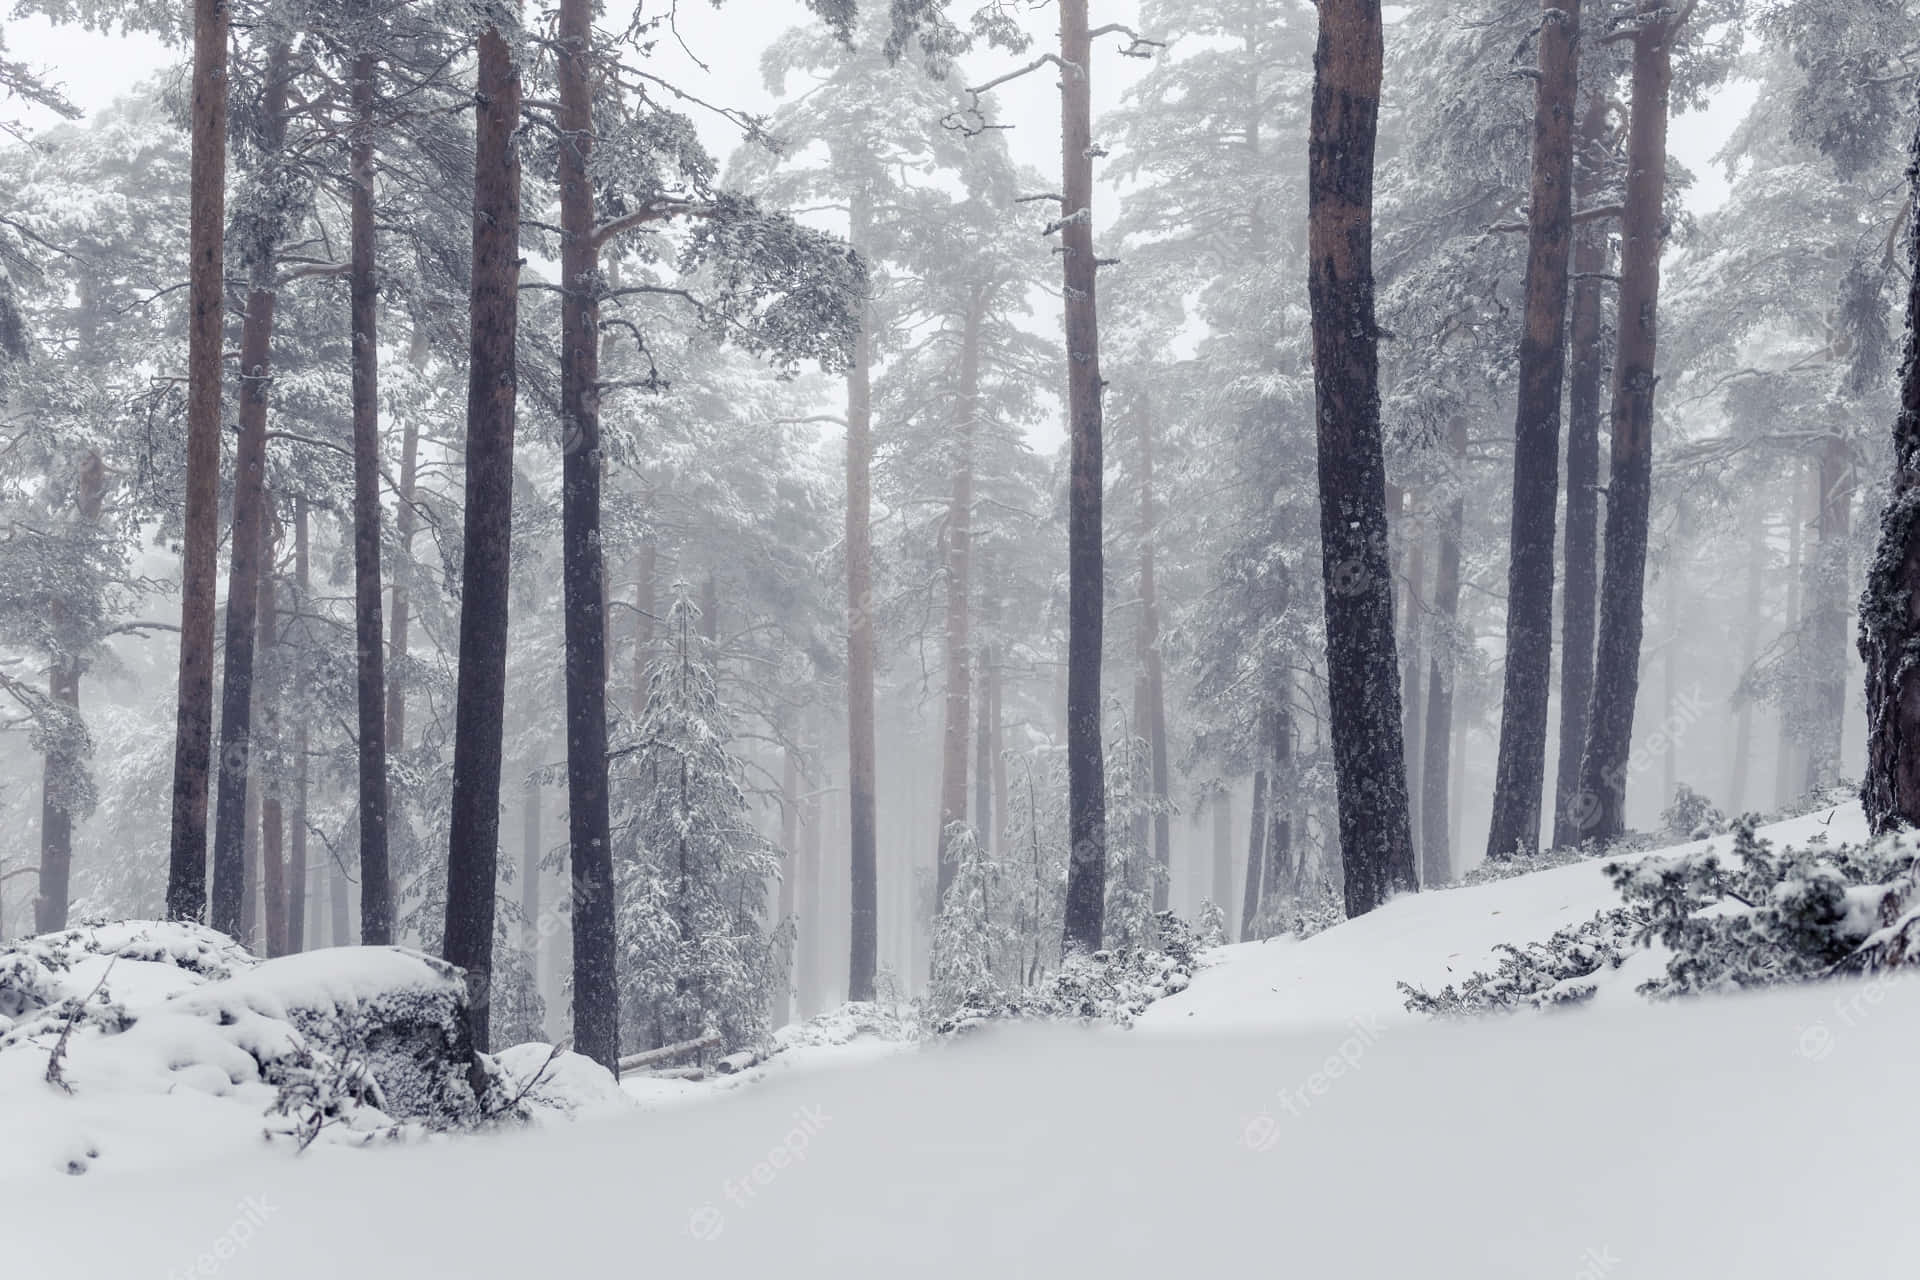 "Walk in the Snowy Forest for an Invigorating Outdoors Experience"